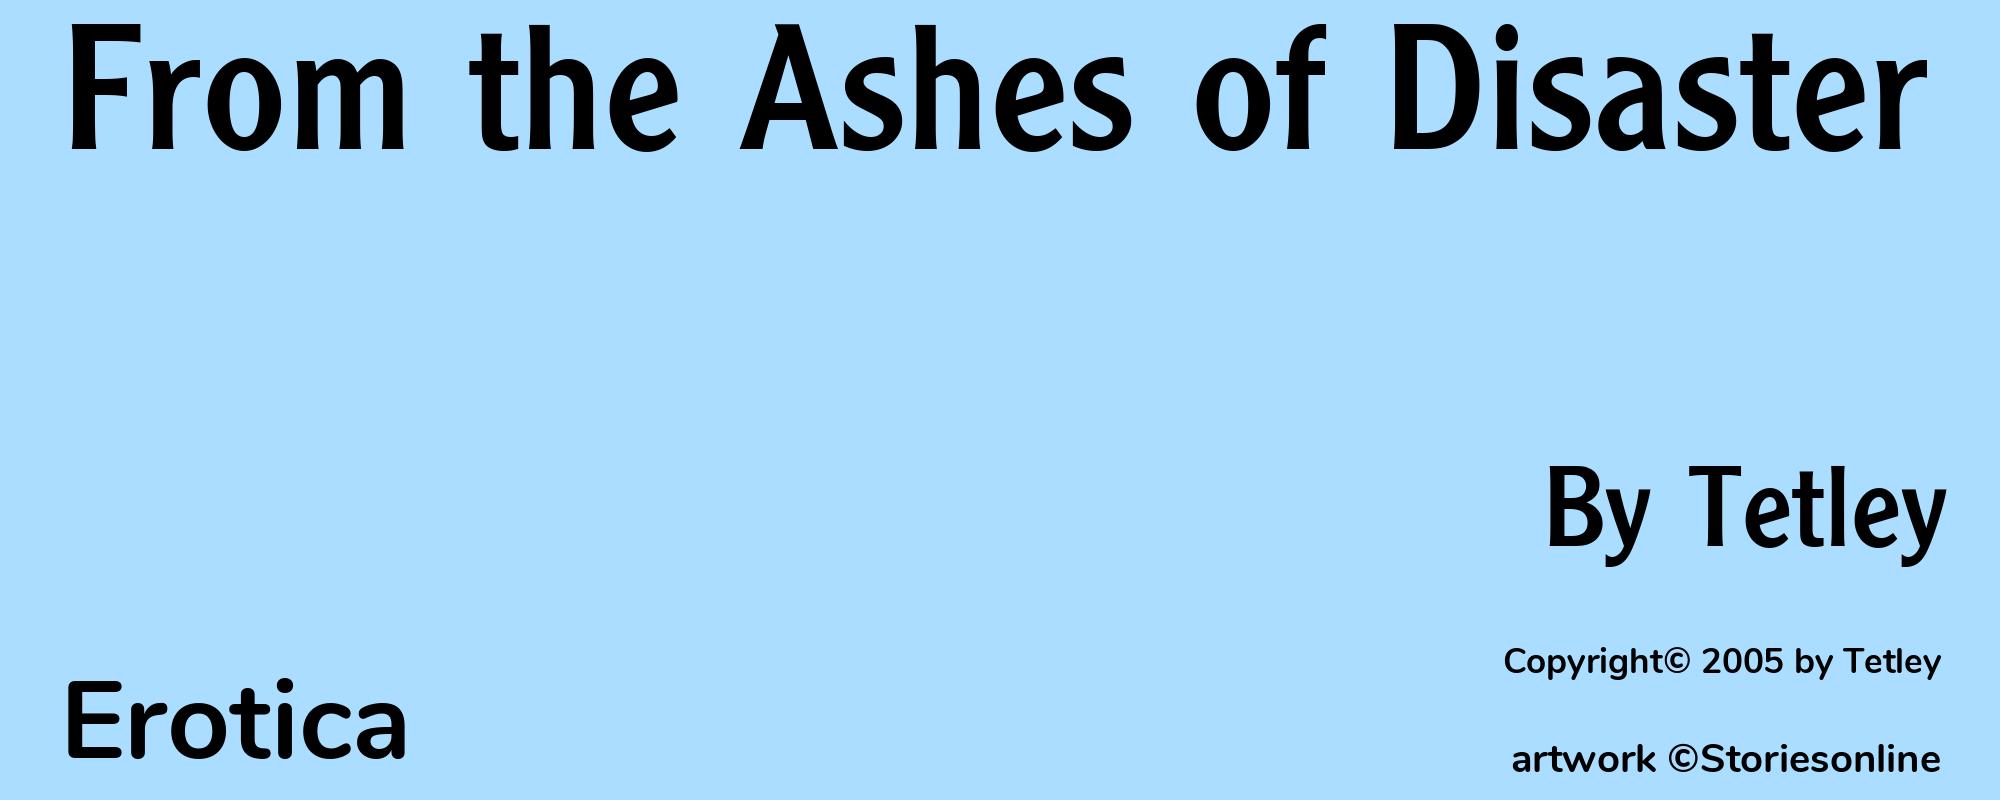 From the Ashes of Disaster - Cover